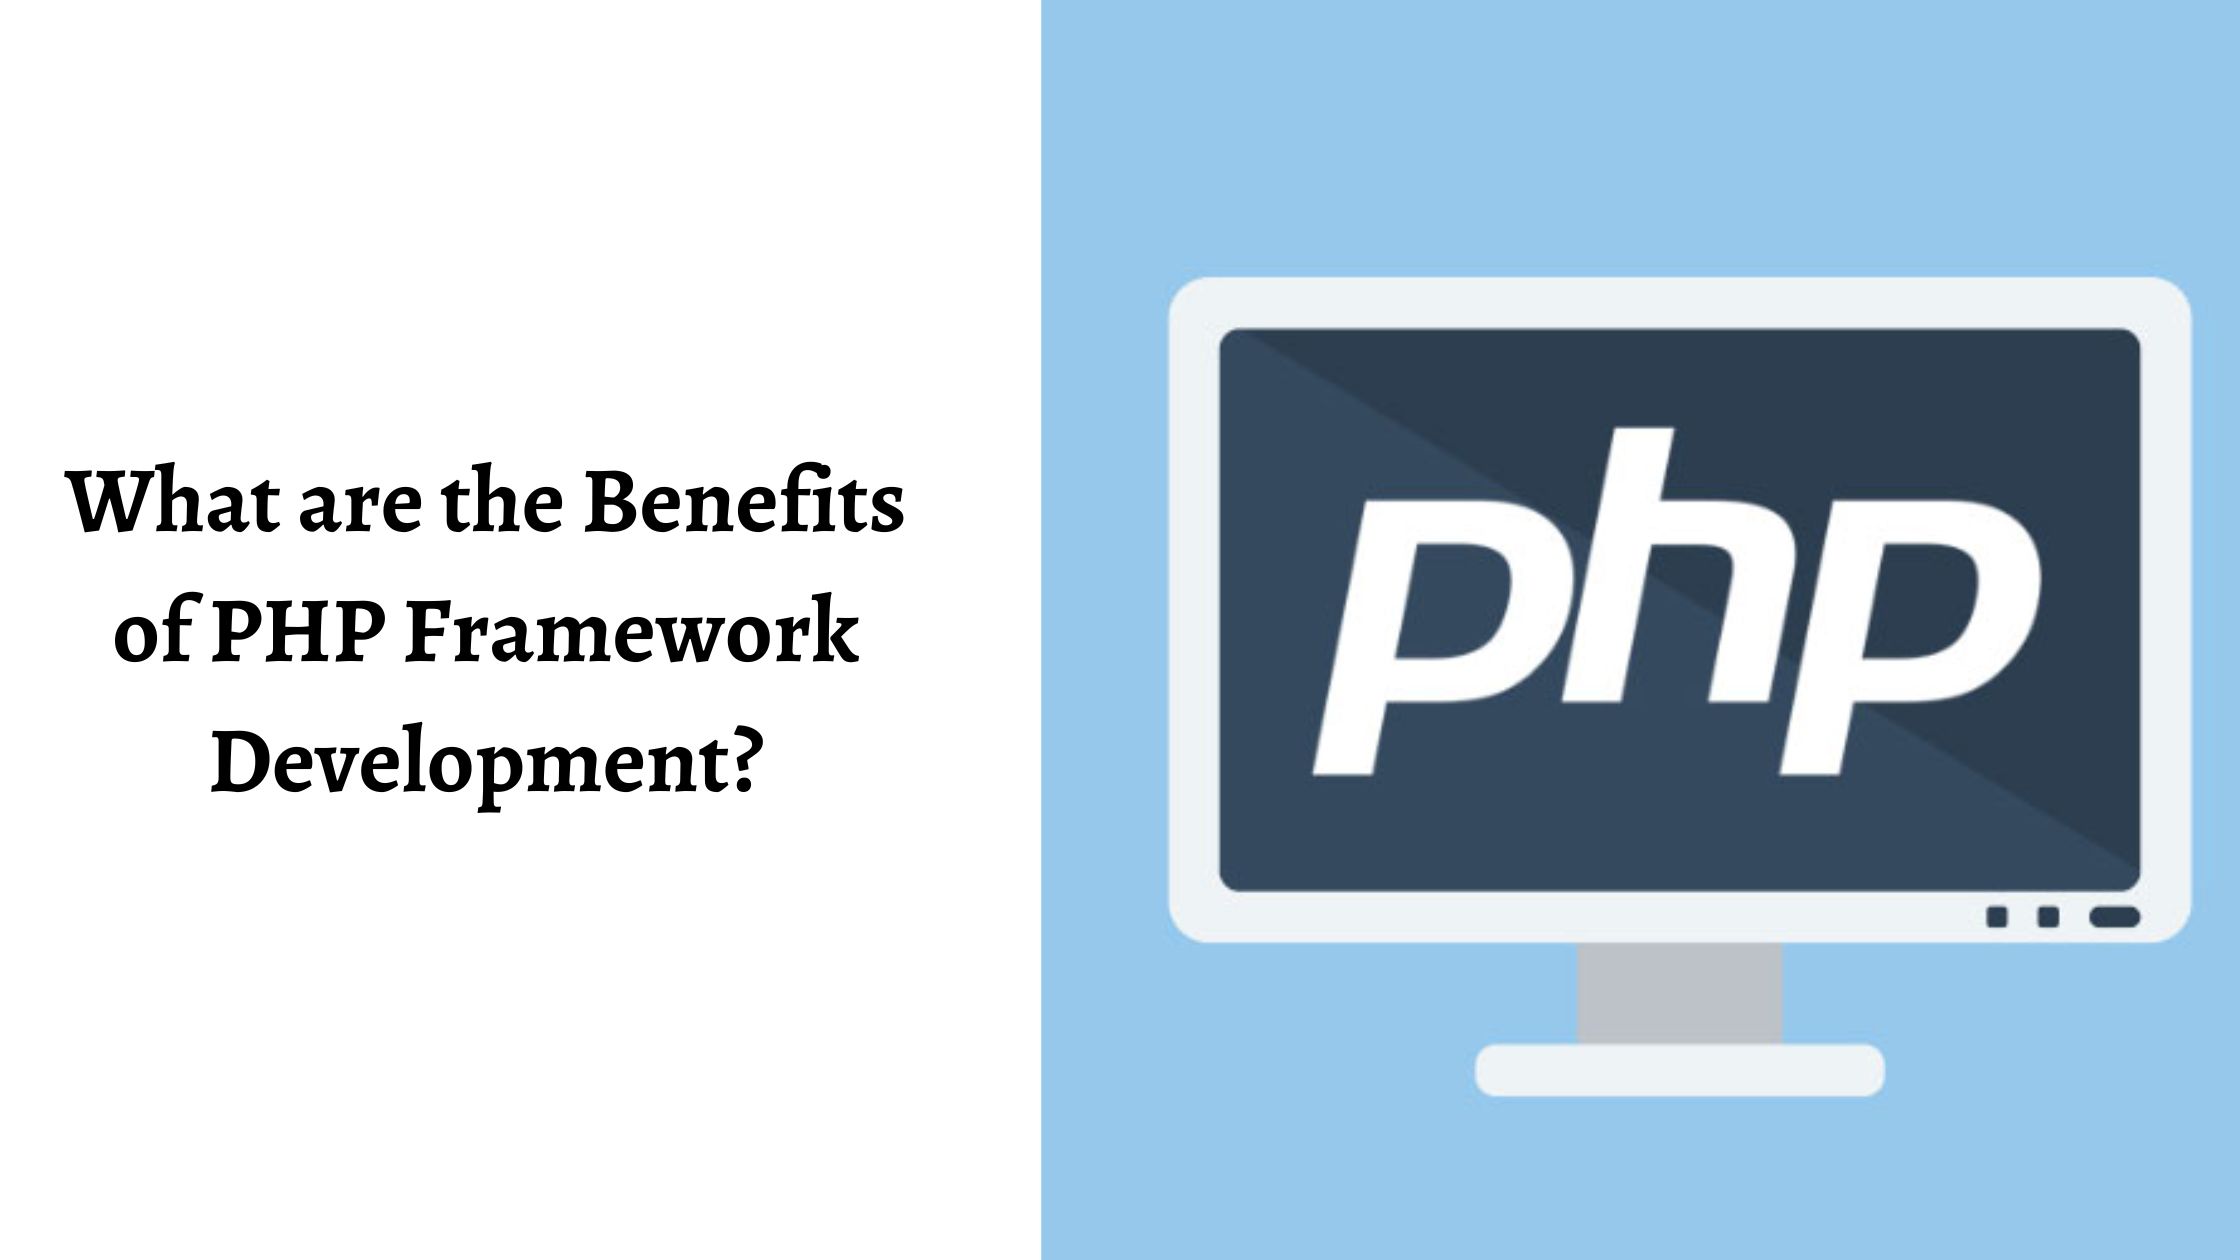 What are the Benefits of PHP Framework Development?